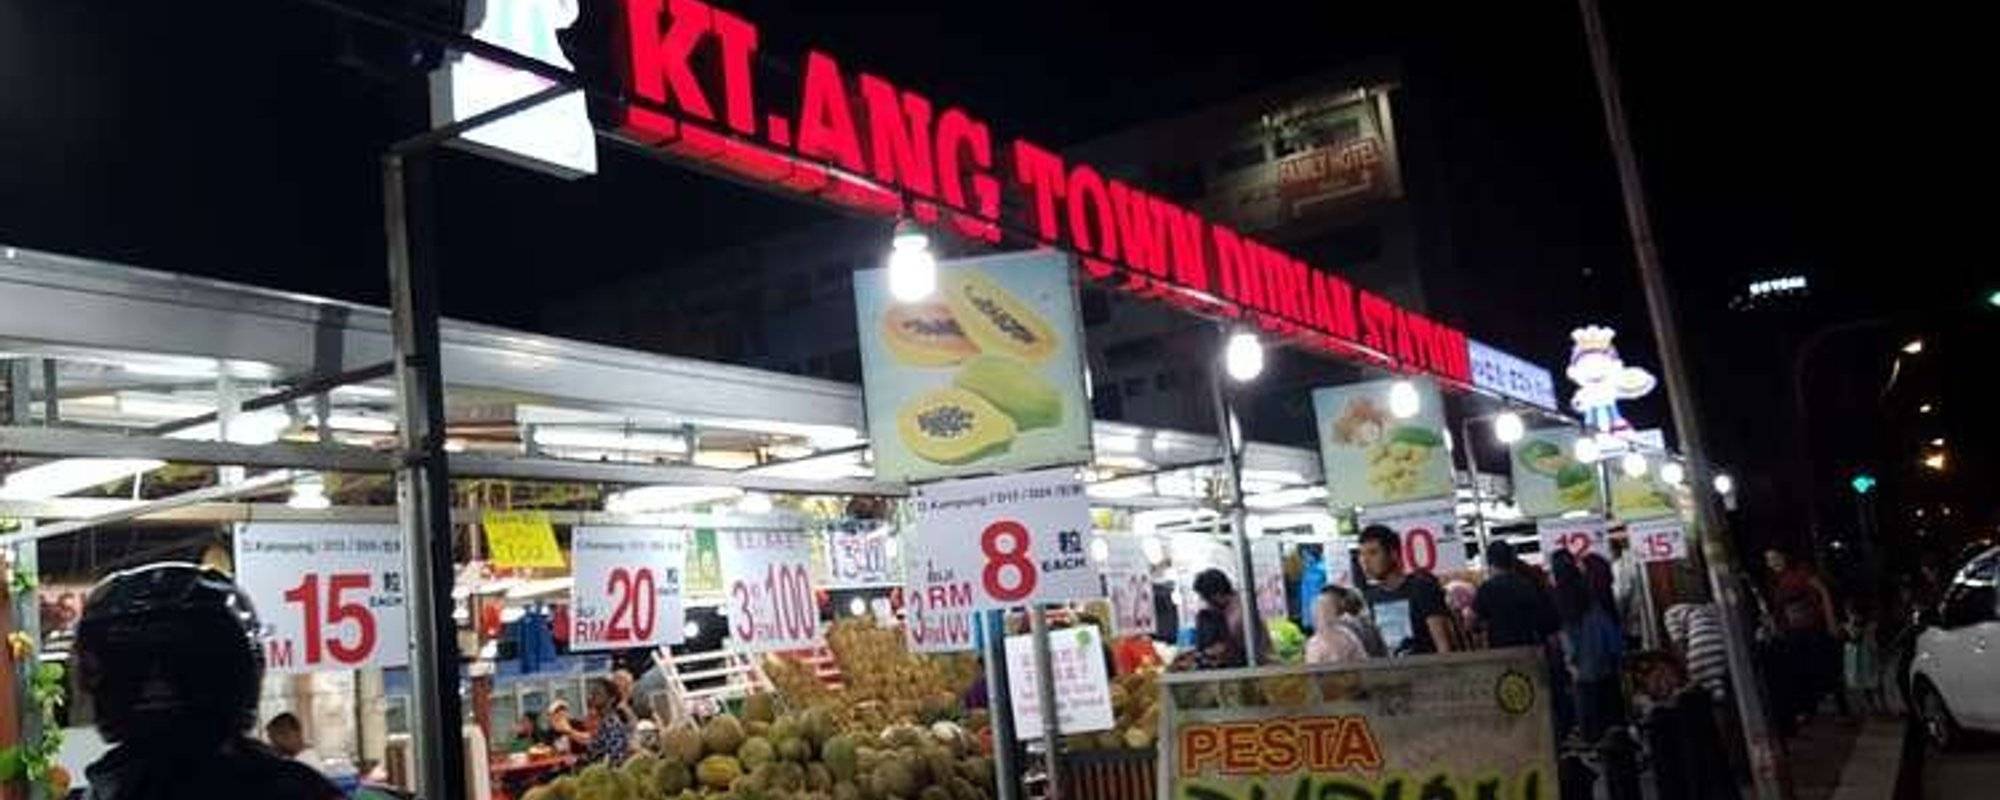 Klang Town Durian Station.